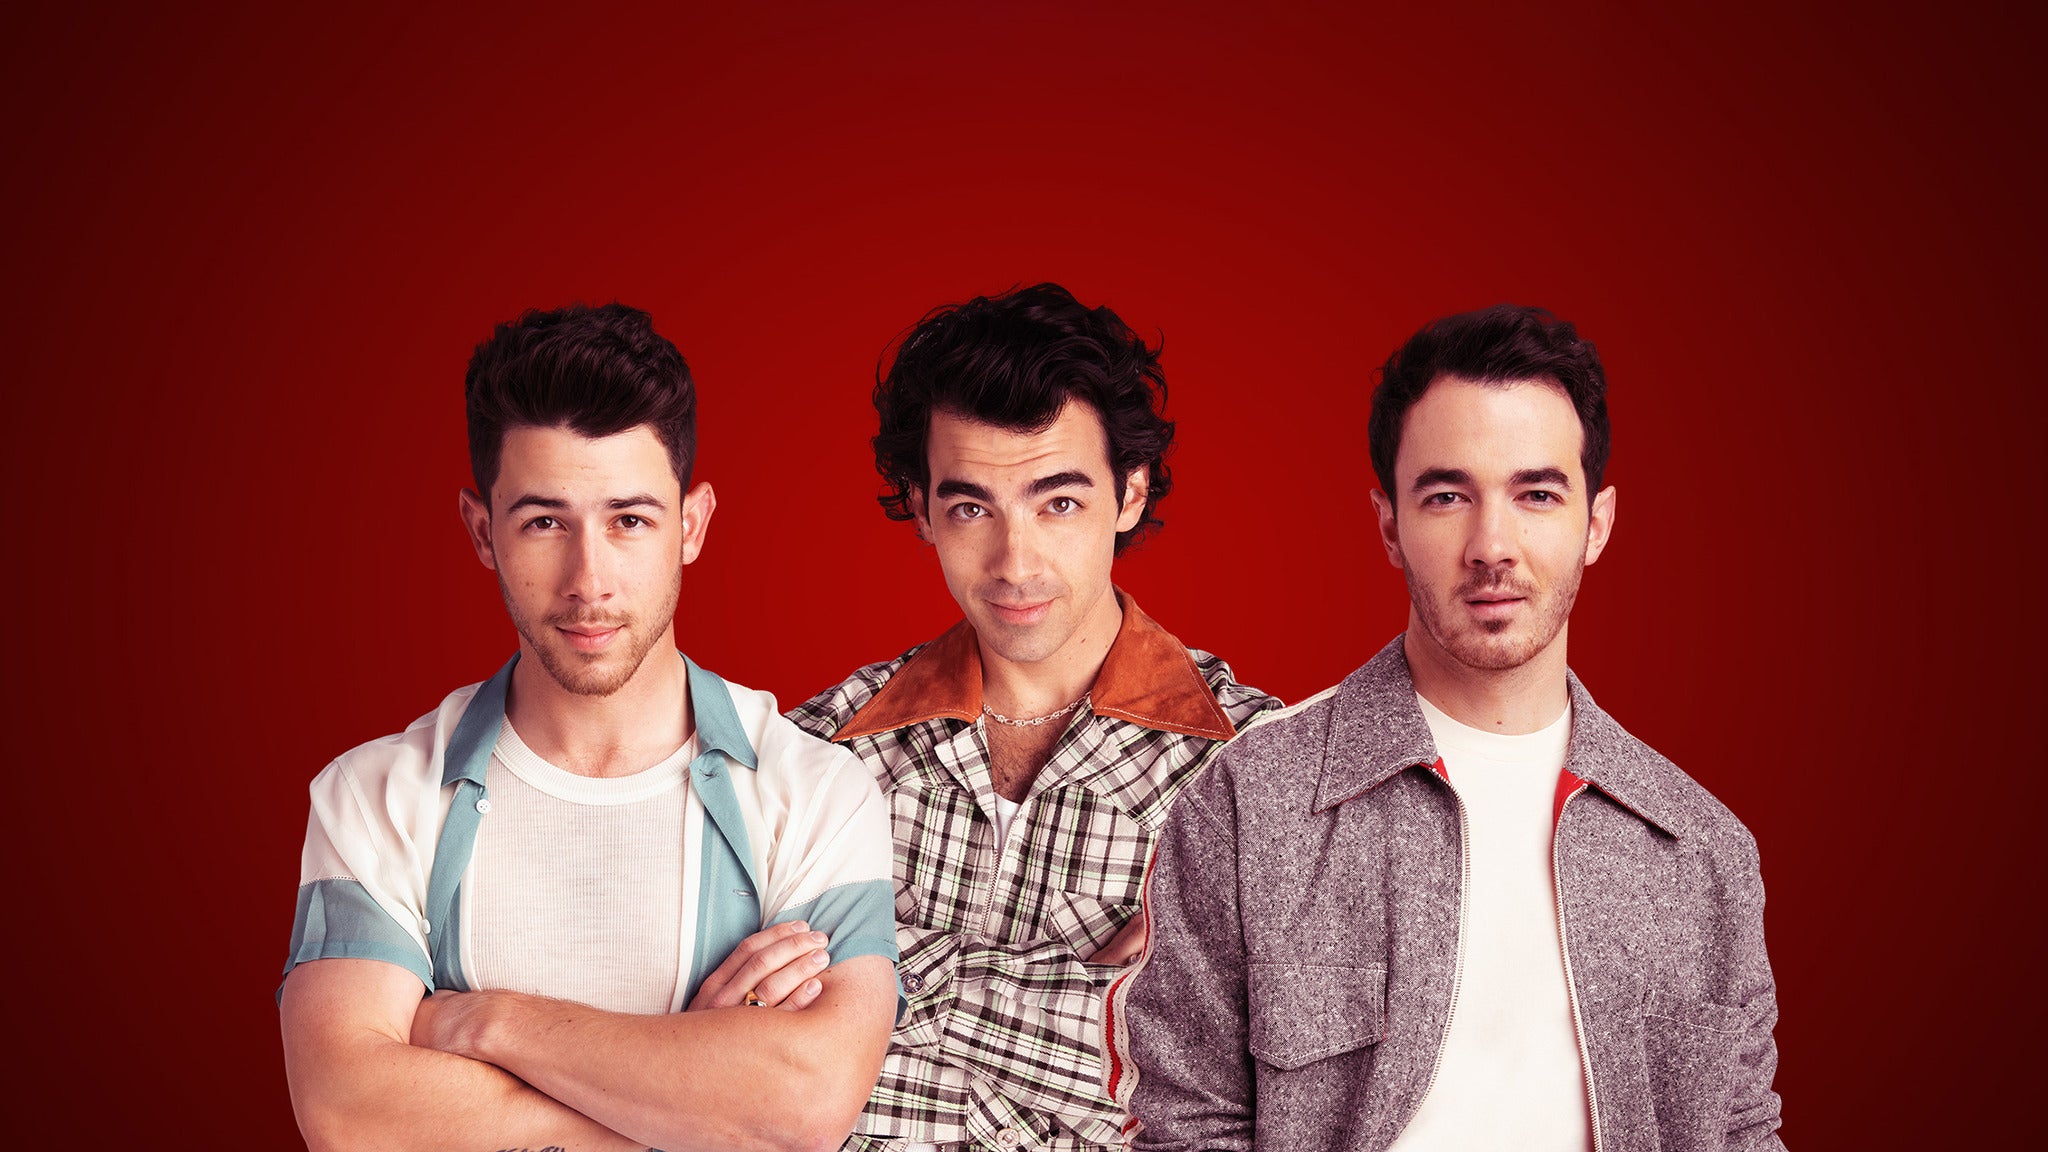 Jonas Brothers: Live in Las Vegas in Las Vegas promo photo for Official Platinum Onsale presale offer code